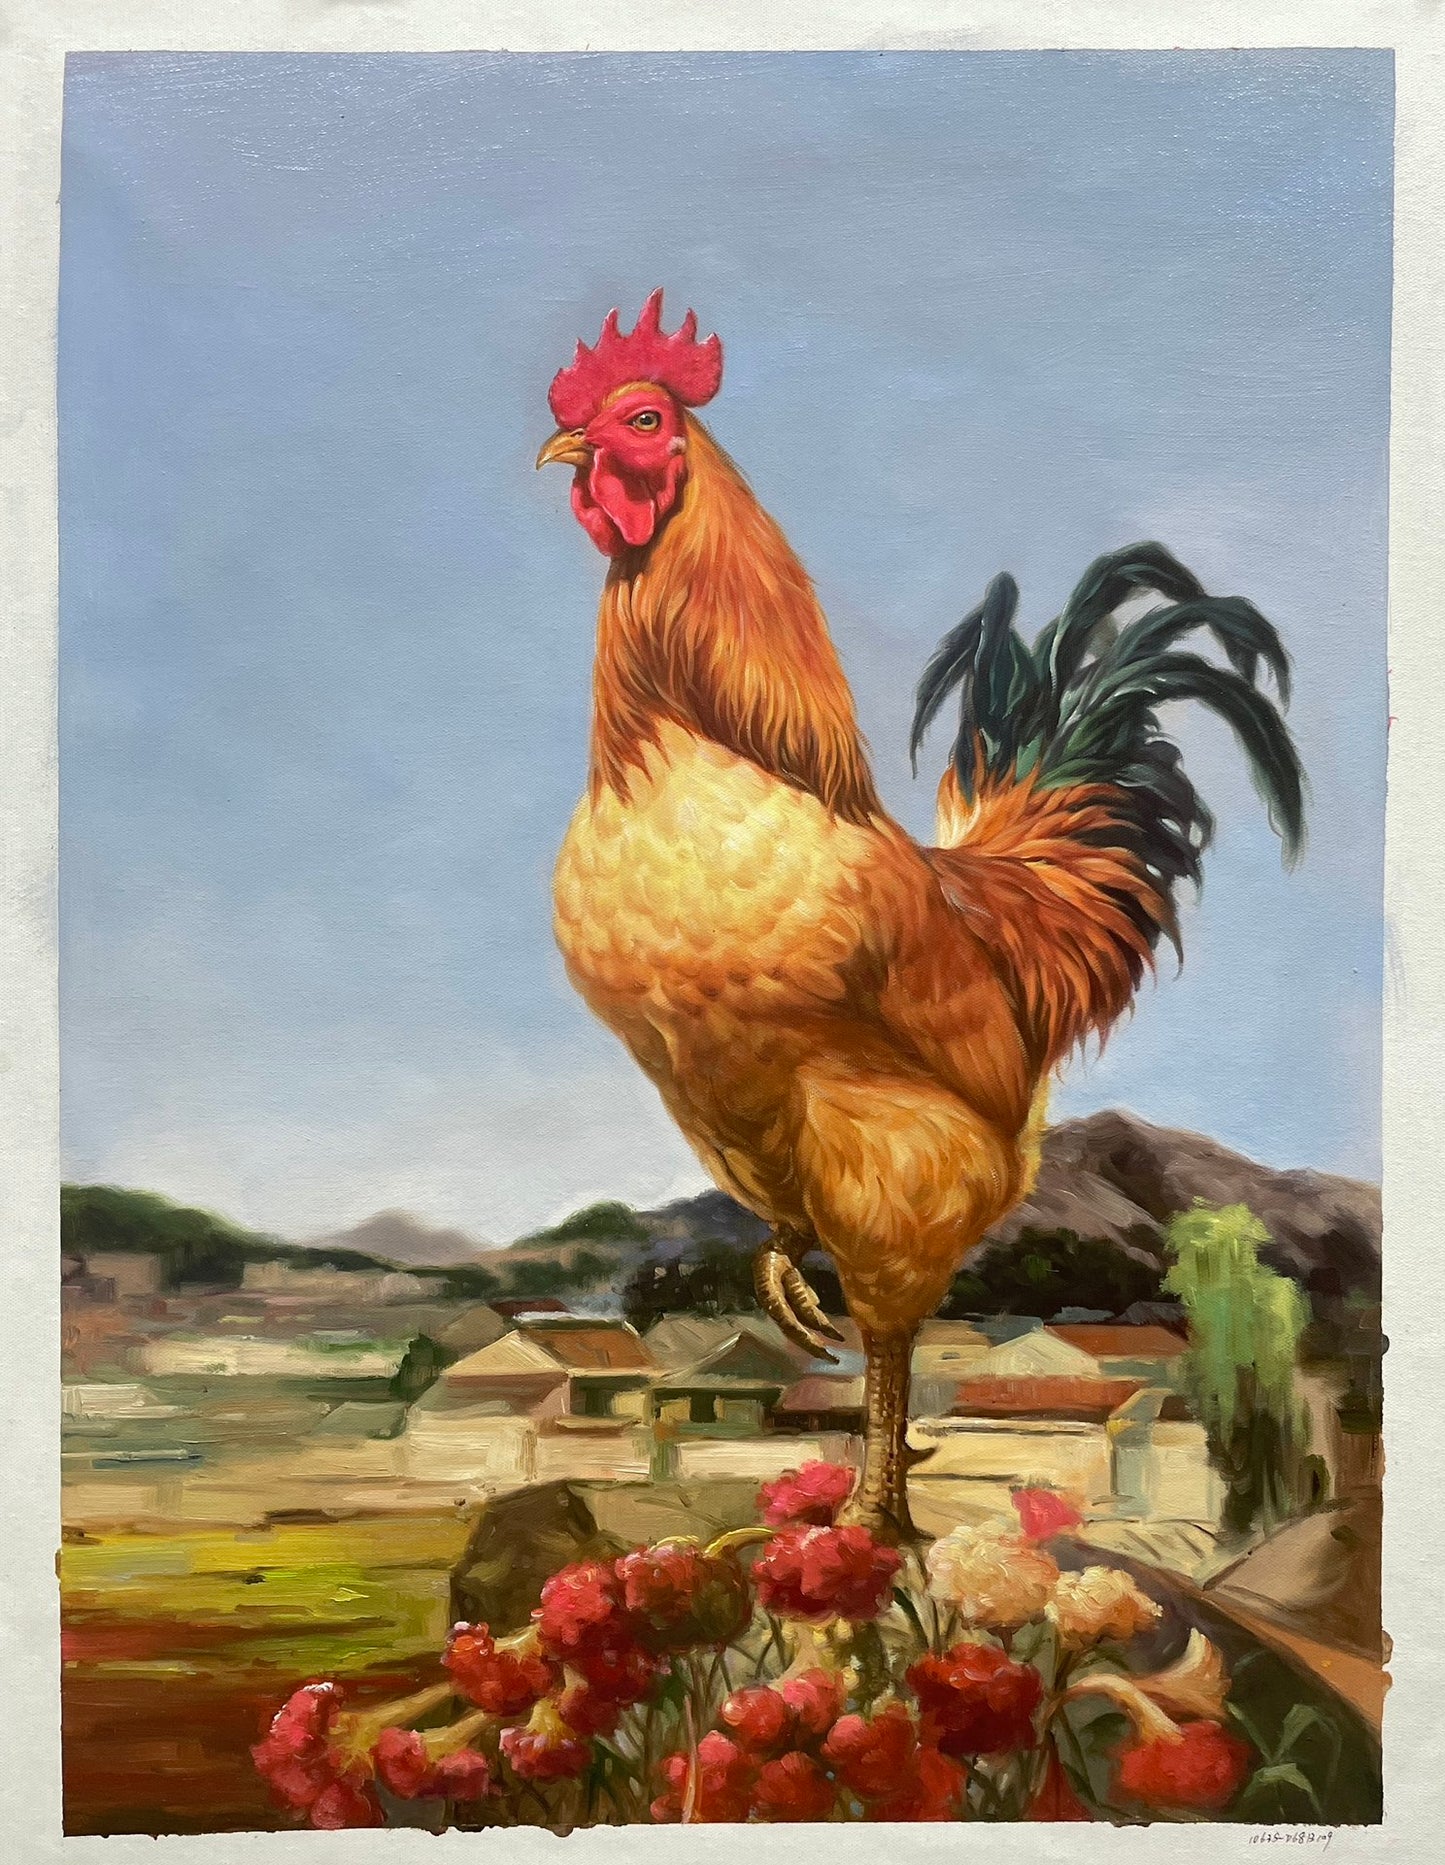 Handmade Rooster Oil Painting on Canvas 24 by 32 Artwork Beautiful Cock Wall Decor